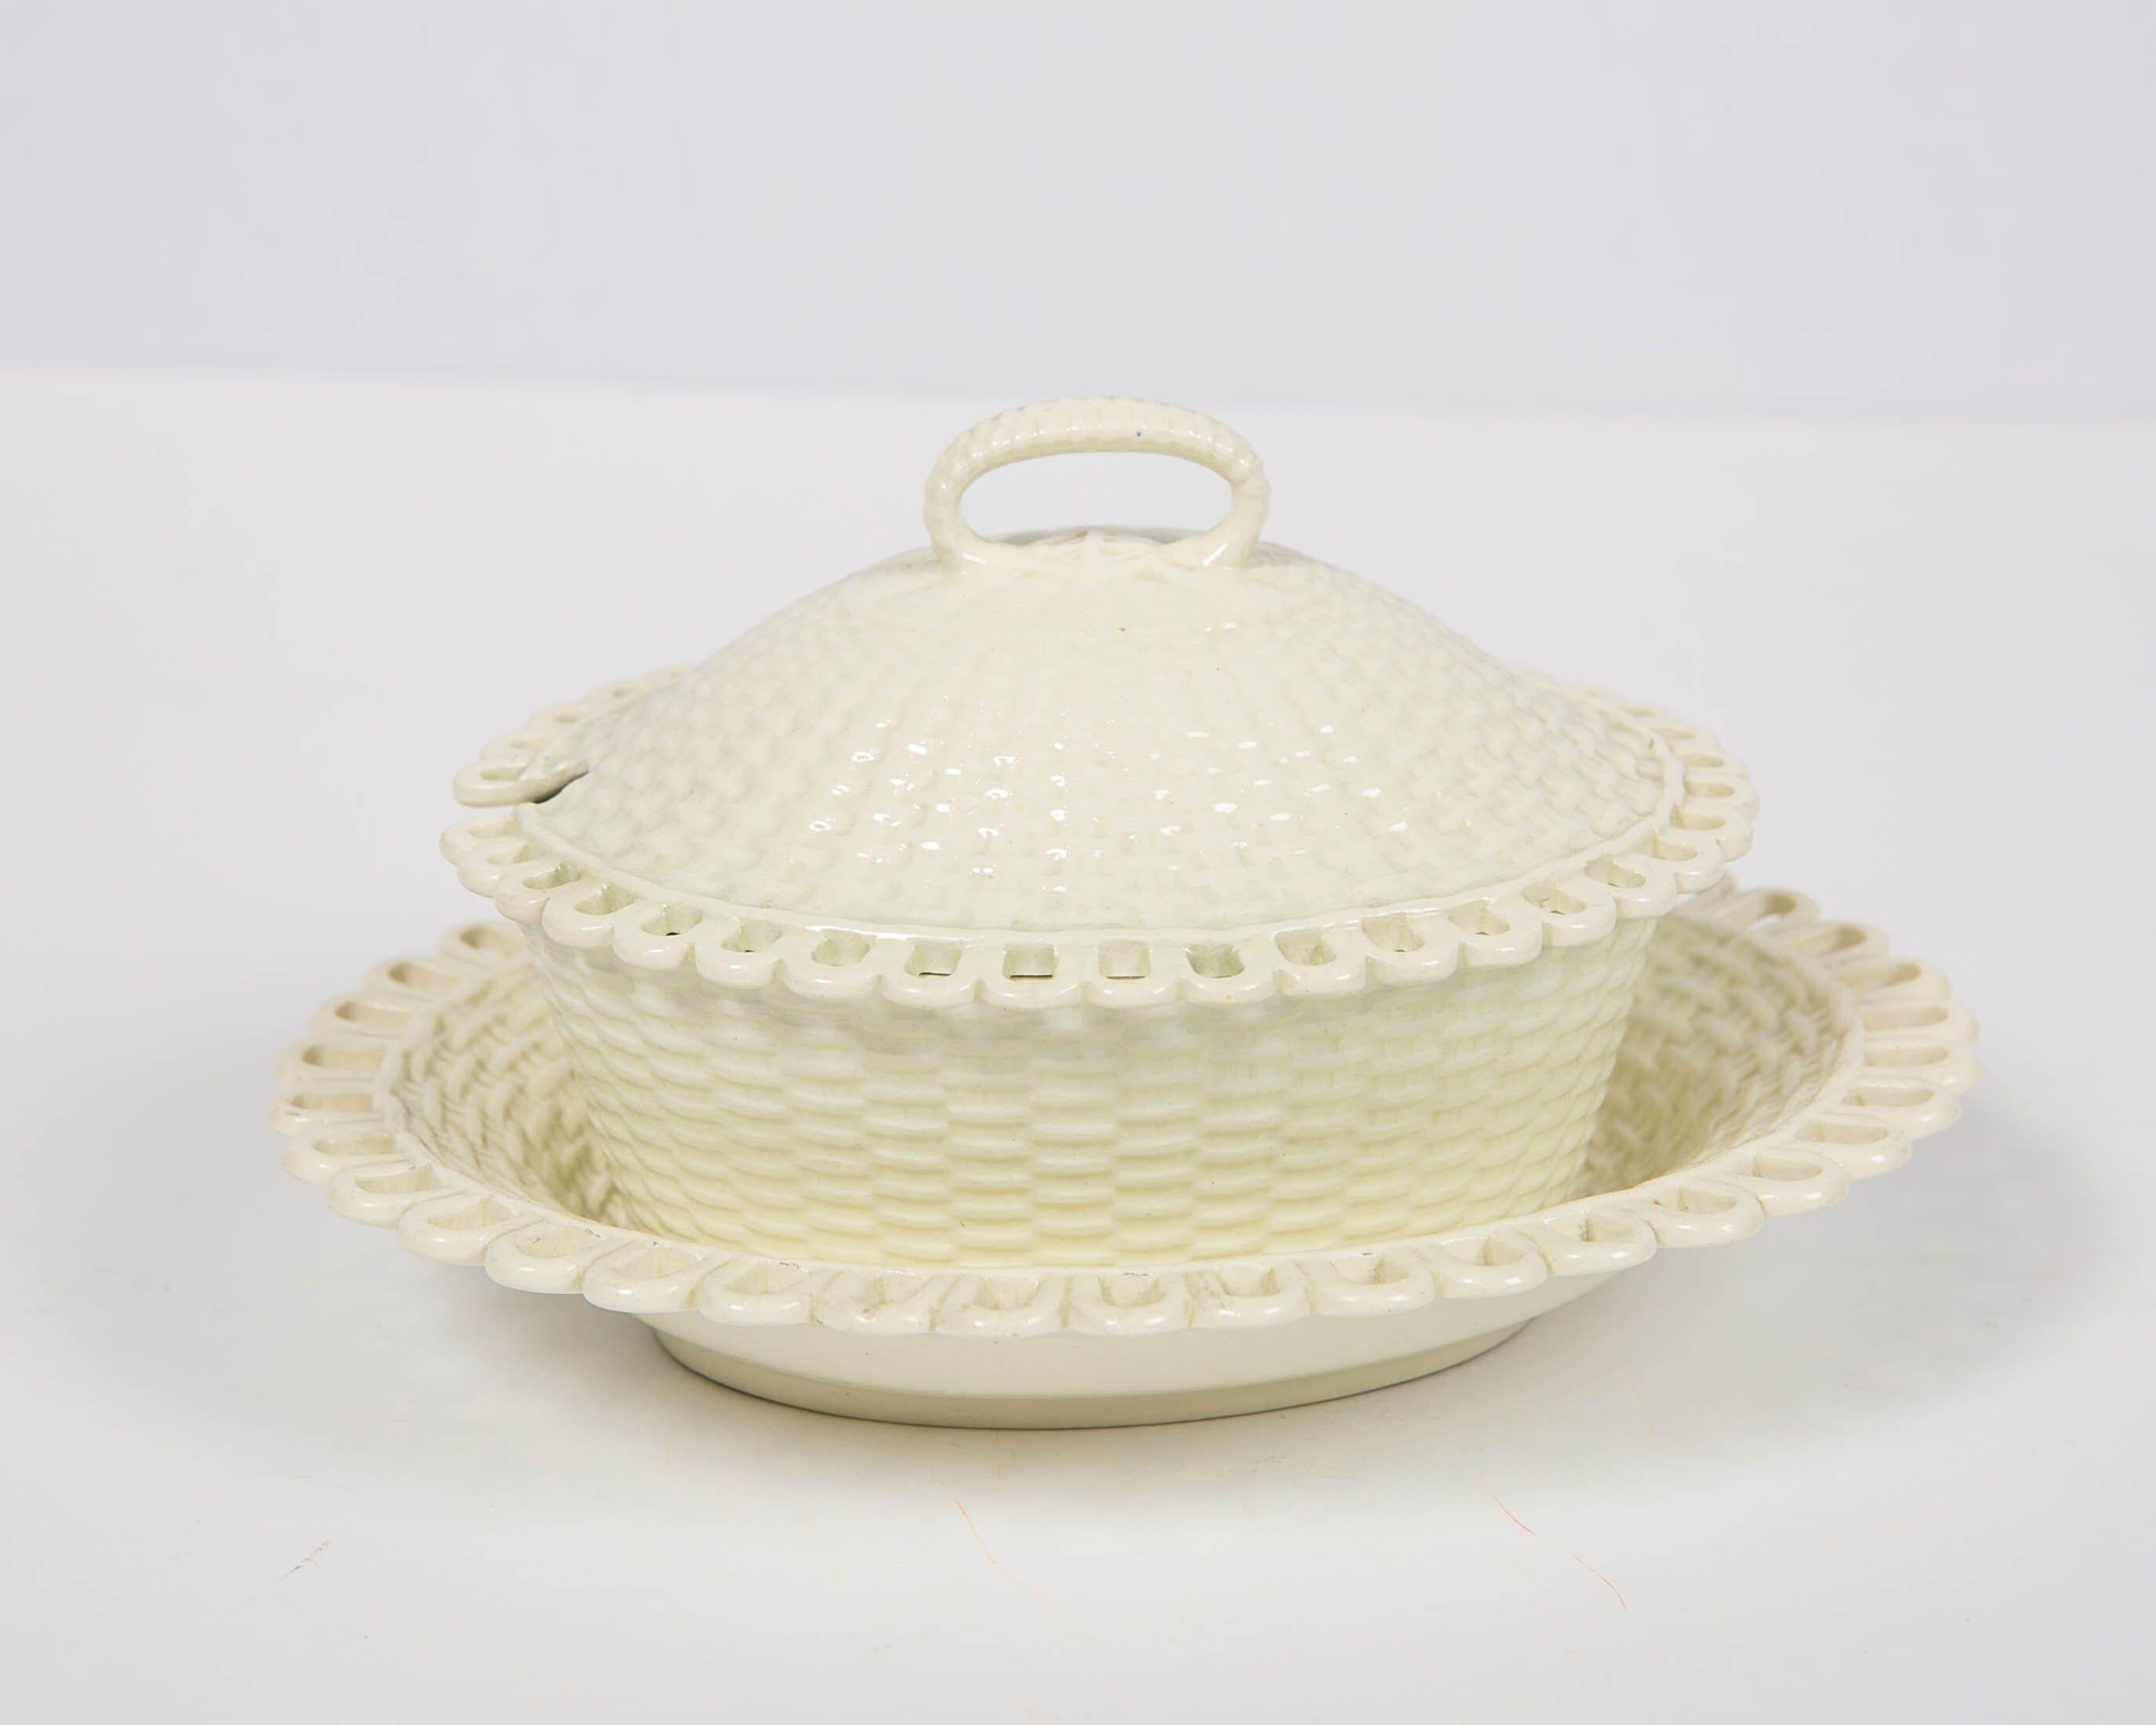 Neoclassical 18th Century Creamware Sauce Tureen and Stand Made in England, circa 1790